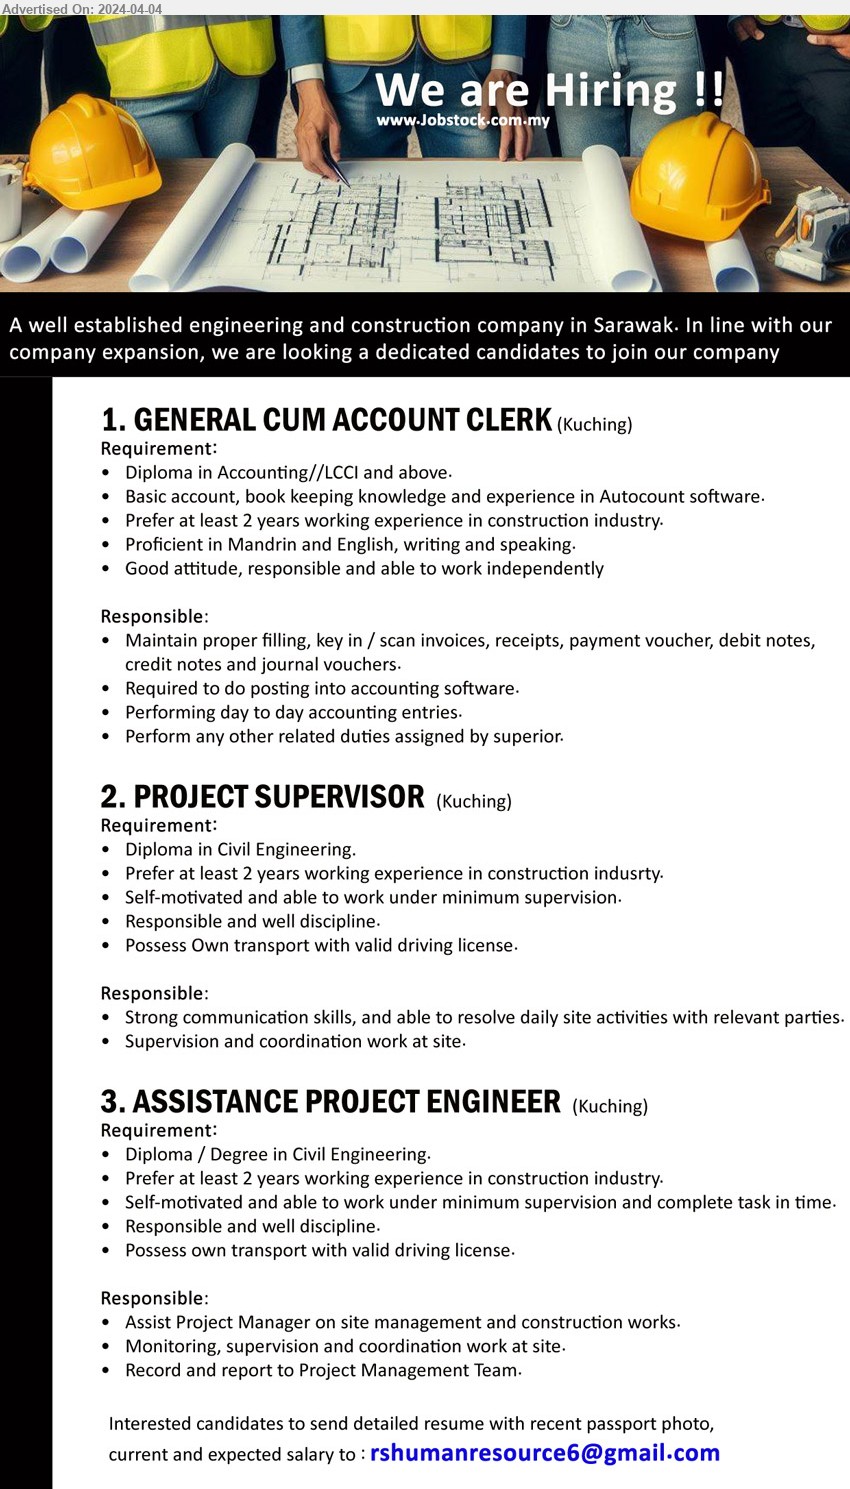 ADVERTISER (Engineering and Contraction Company) - 1. GENERAL CUM ACCOUNT CLERK (Kuching), Diploma in Accounting//LCCI and above, basic account, book keeping knowledge and experience in Autocount software, ...
2. PROJECT SUPERVISOR (Kuching), Diploma in Civil Engineering, 2 yrs. exp.,...
3. ASSISTANCE PROJECT ENGINEER (Kuching), , 2 yrs. exp....

Email resume to ...